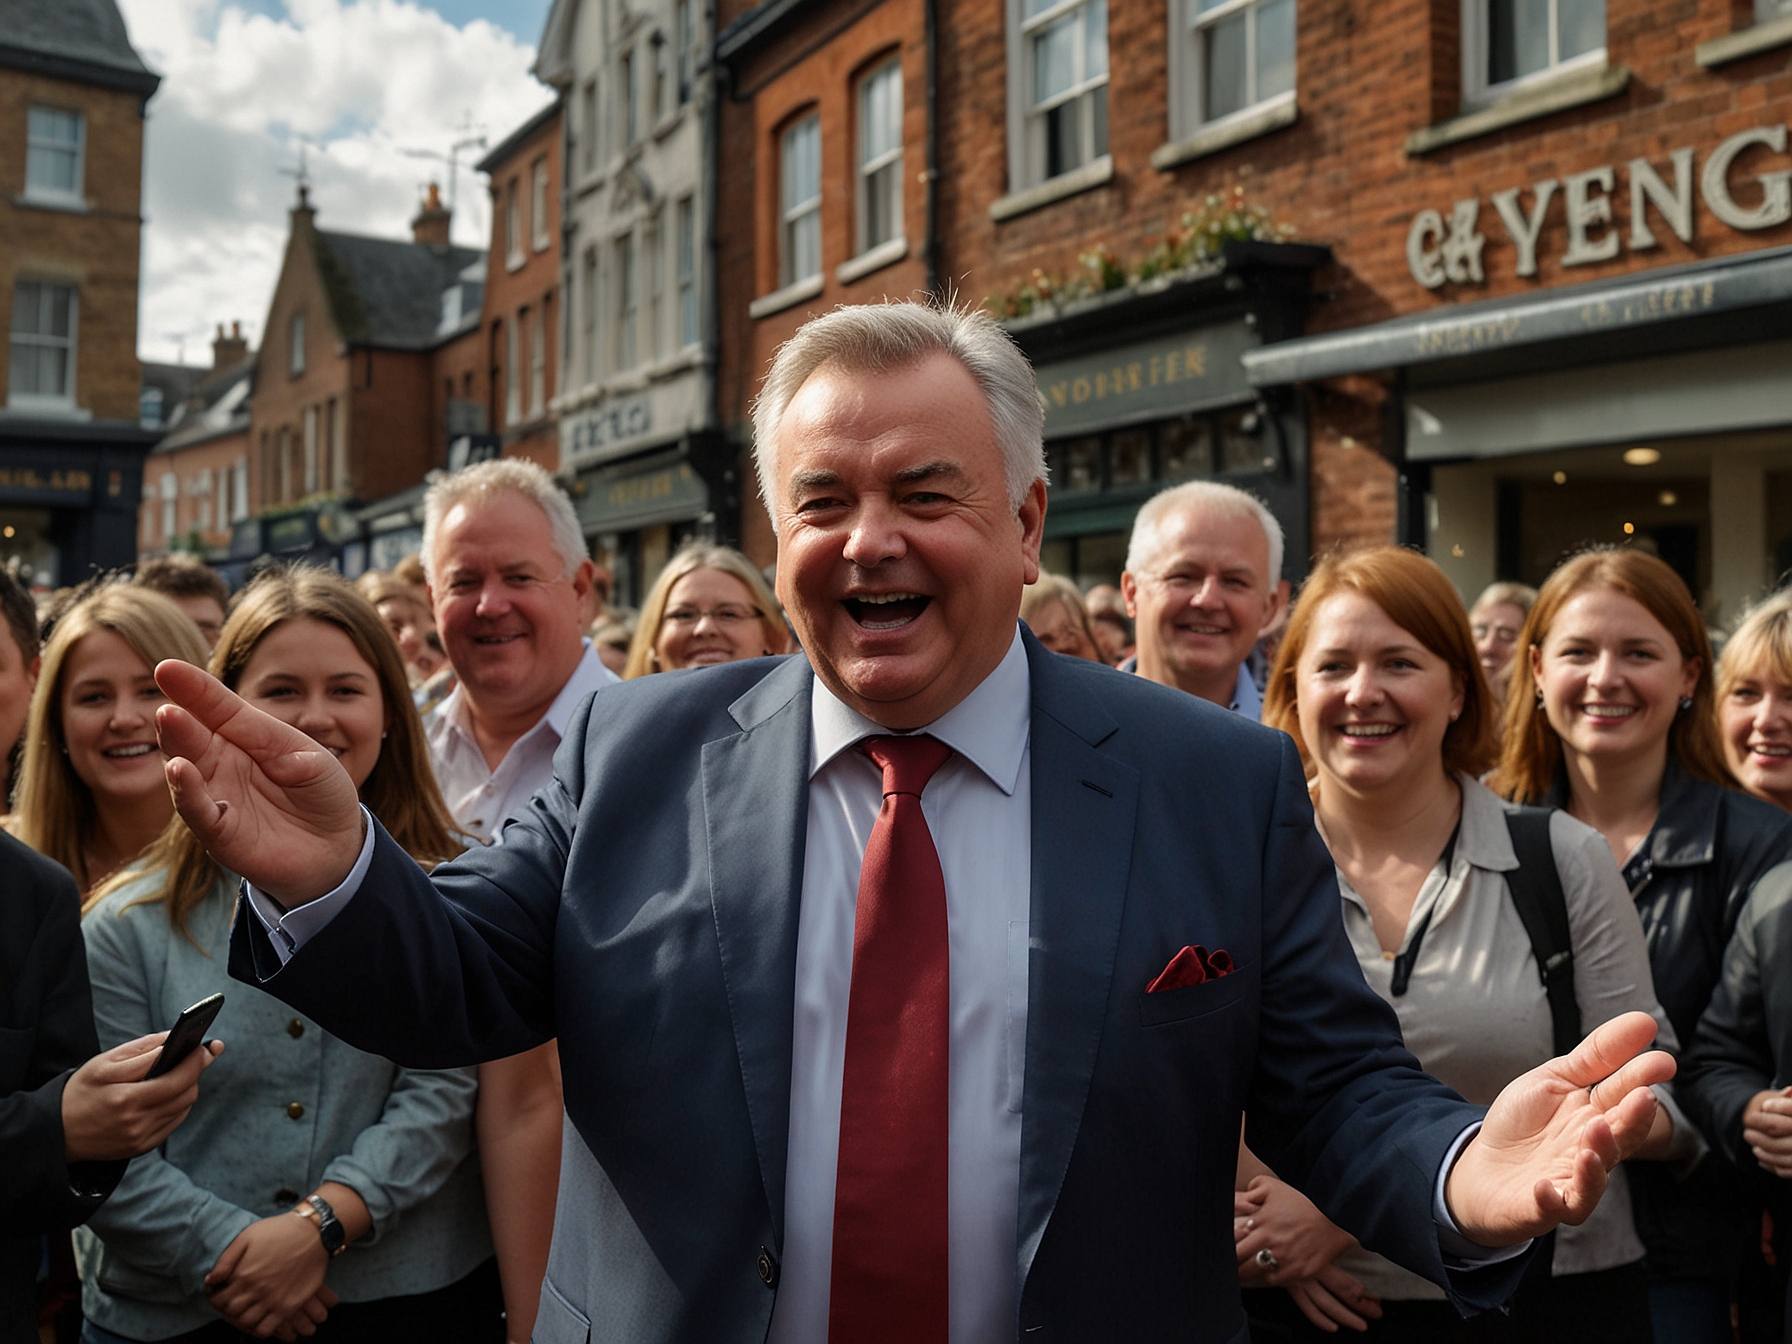 Eamonn Holmes receives a warm welcome from fans as he makes a public appearance, hinting at the continued support he enjoys despite recent health and personal struggles.